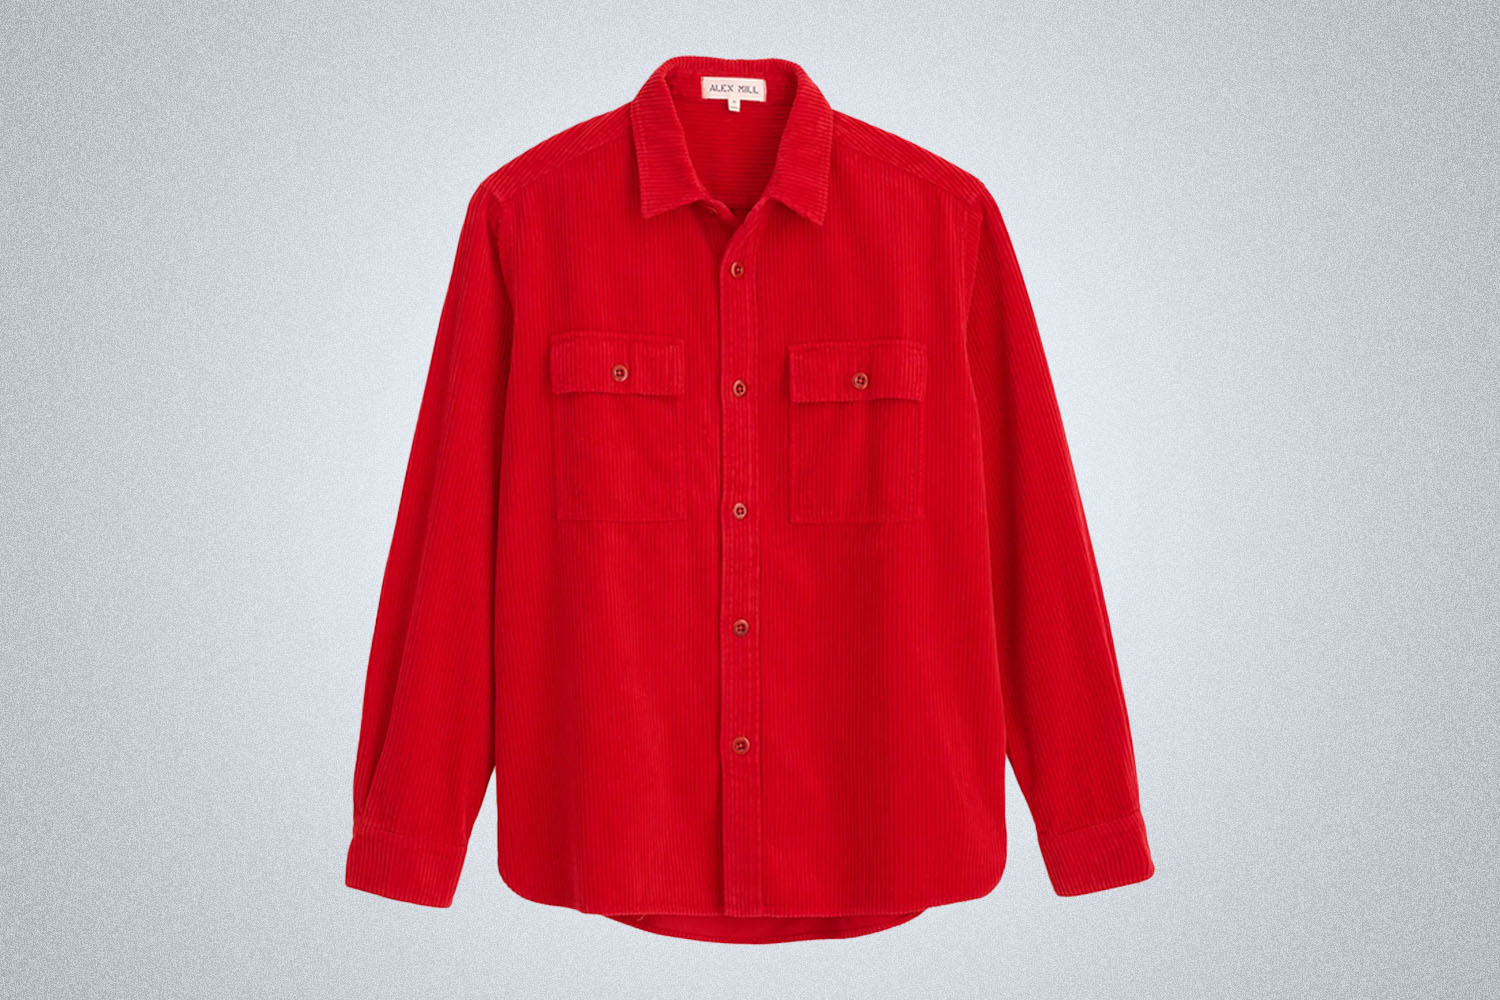 a red overshirt from Alex Mill on a grey background